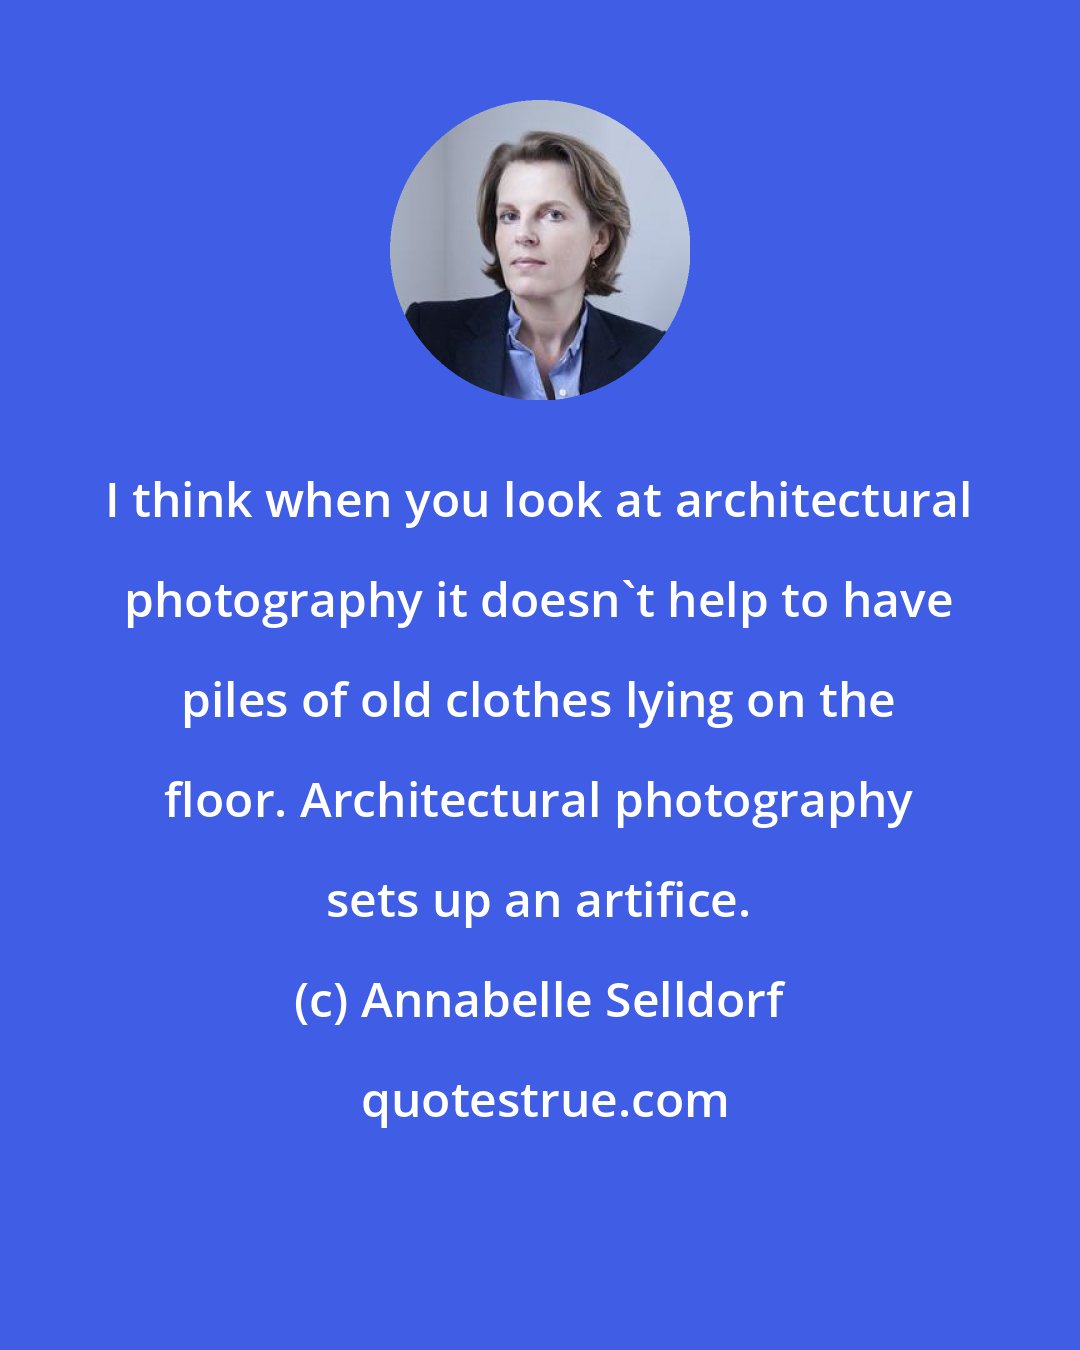 Annabelle Selldorf: I think when you look at architectural photography it doesn't help to have piles of old clothes lying on the floor. Architectural photography sets up an artifice.